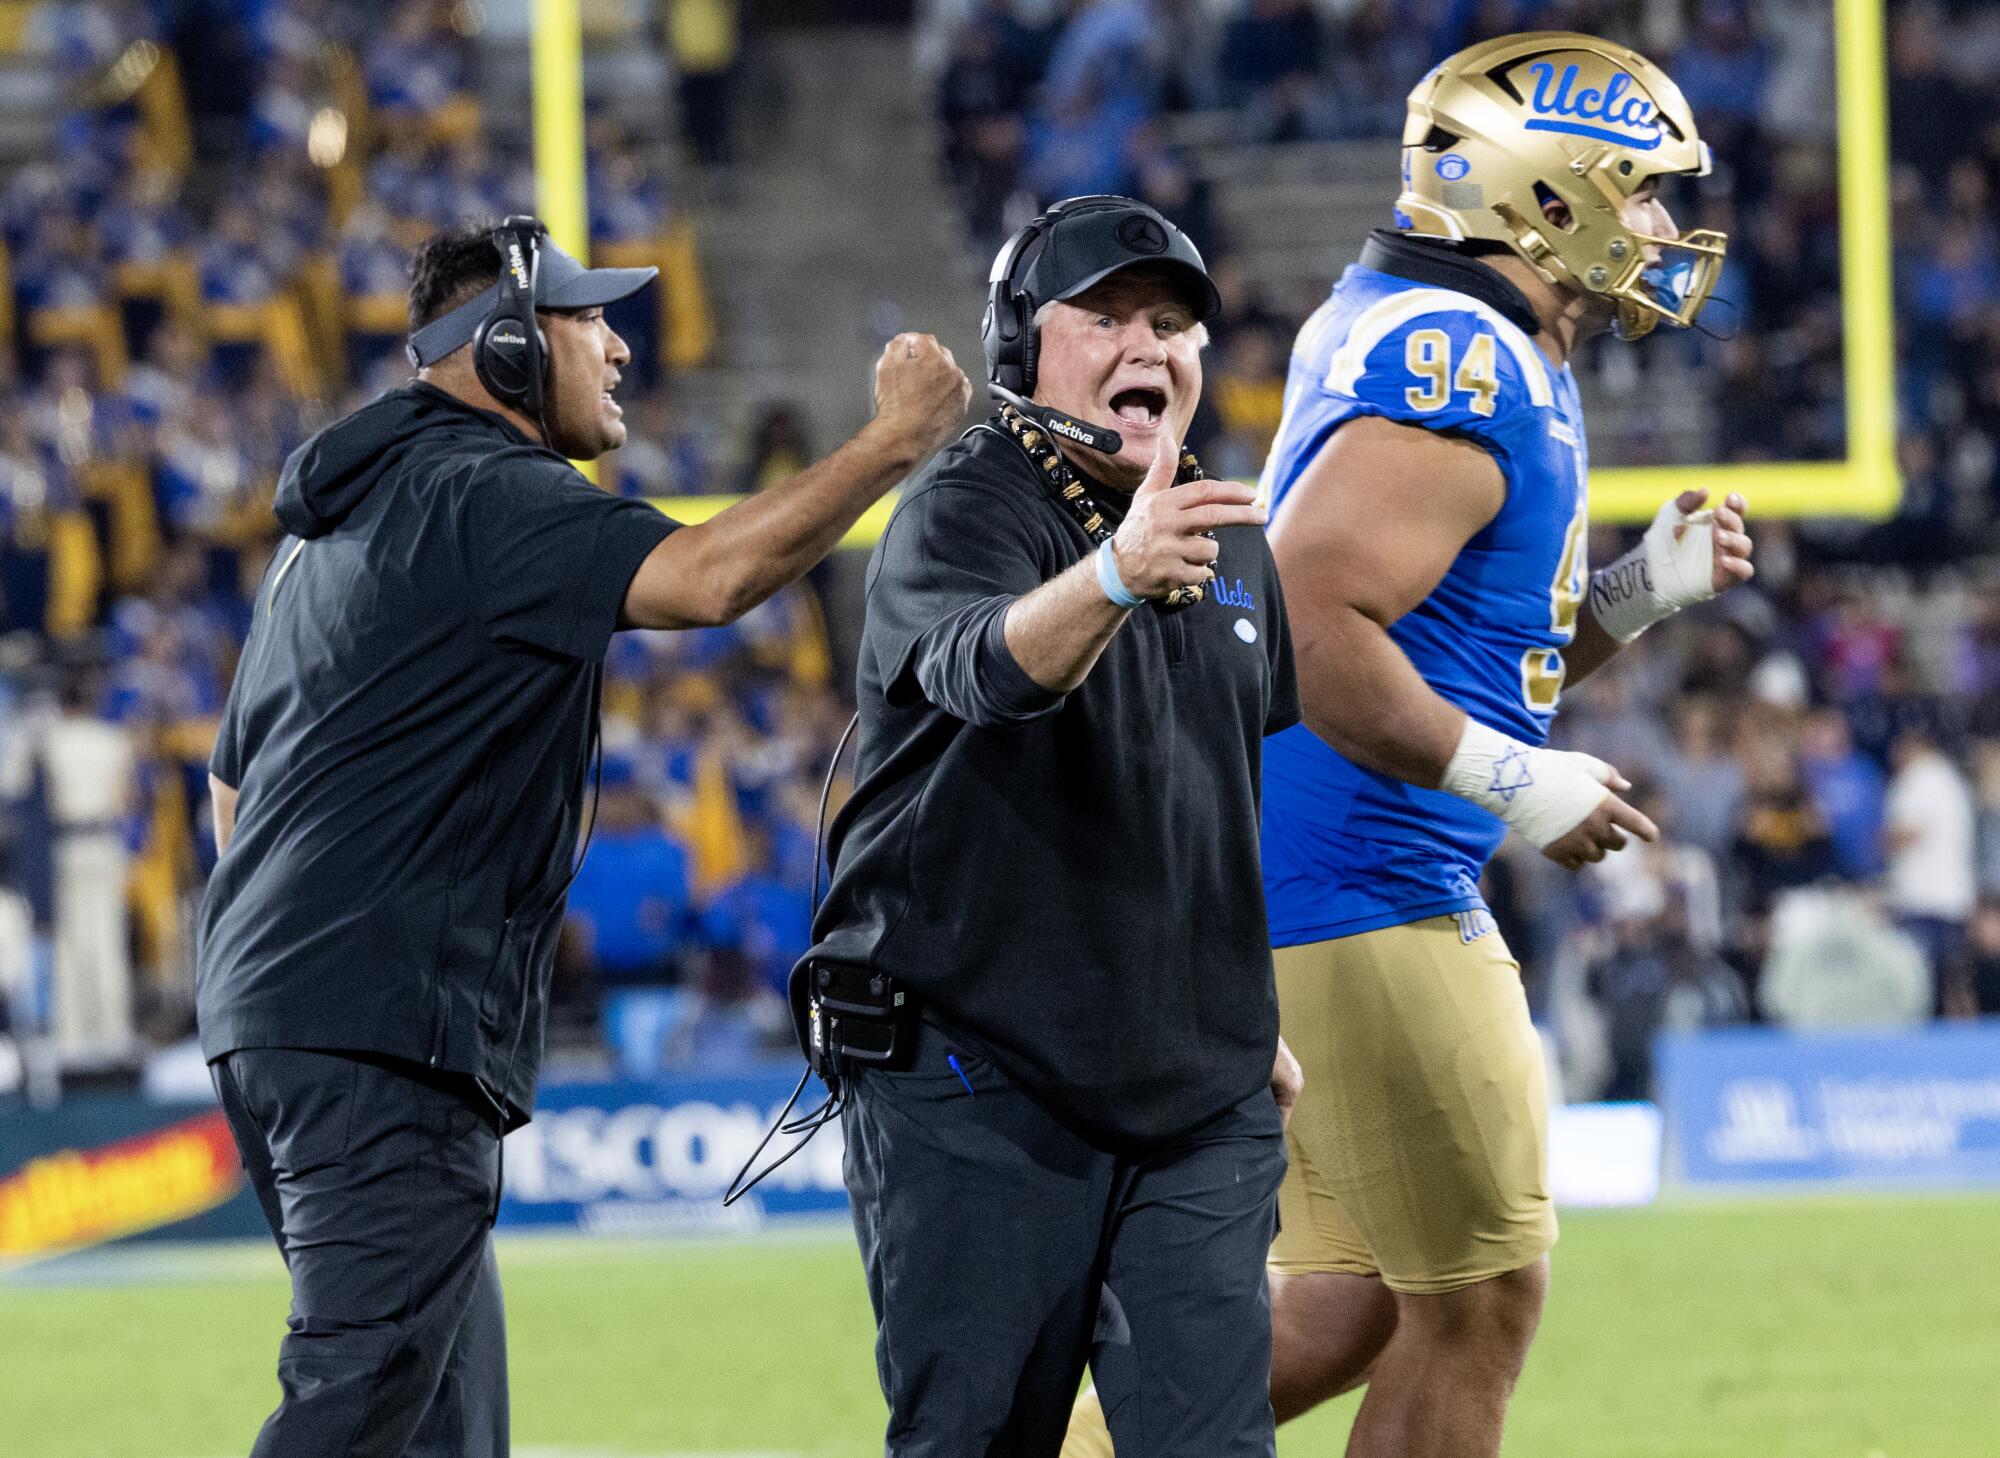 UCLA coach Chip Kelly yells at the officials after his team was called for a defensive penalty against Cal 